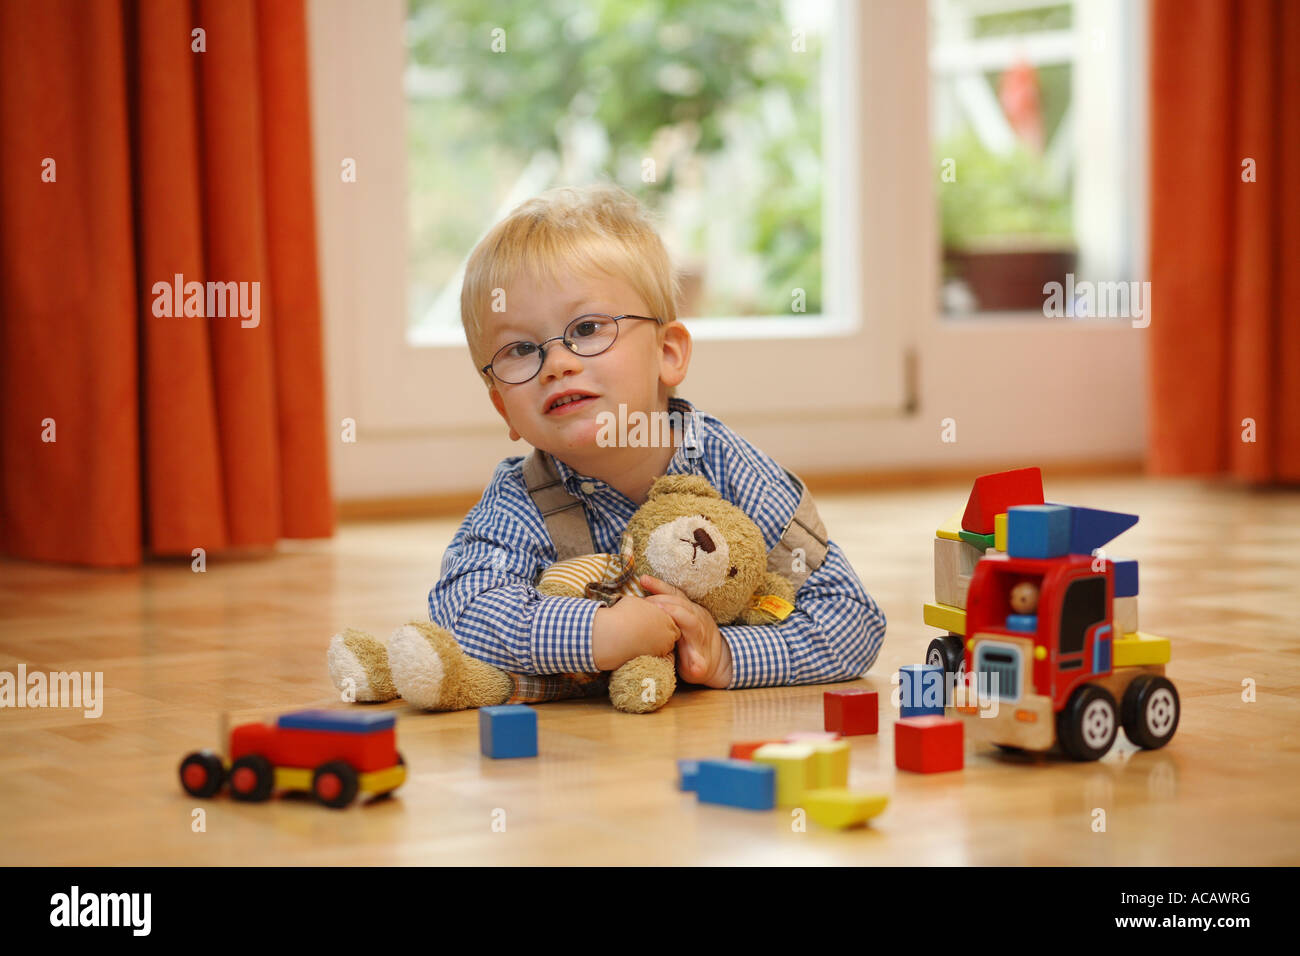 Little boy with teddy bear, Strabismus Stock Photo